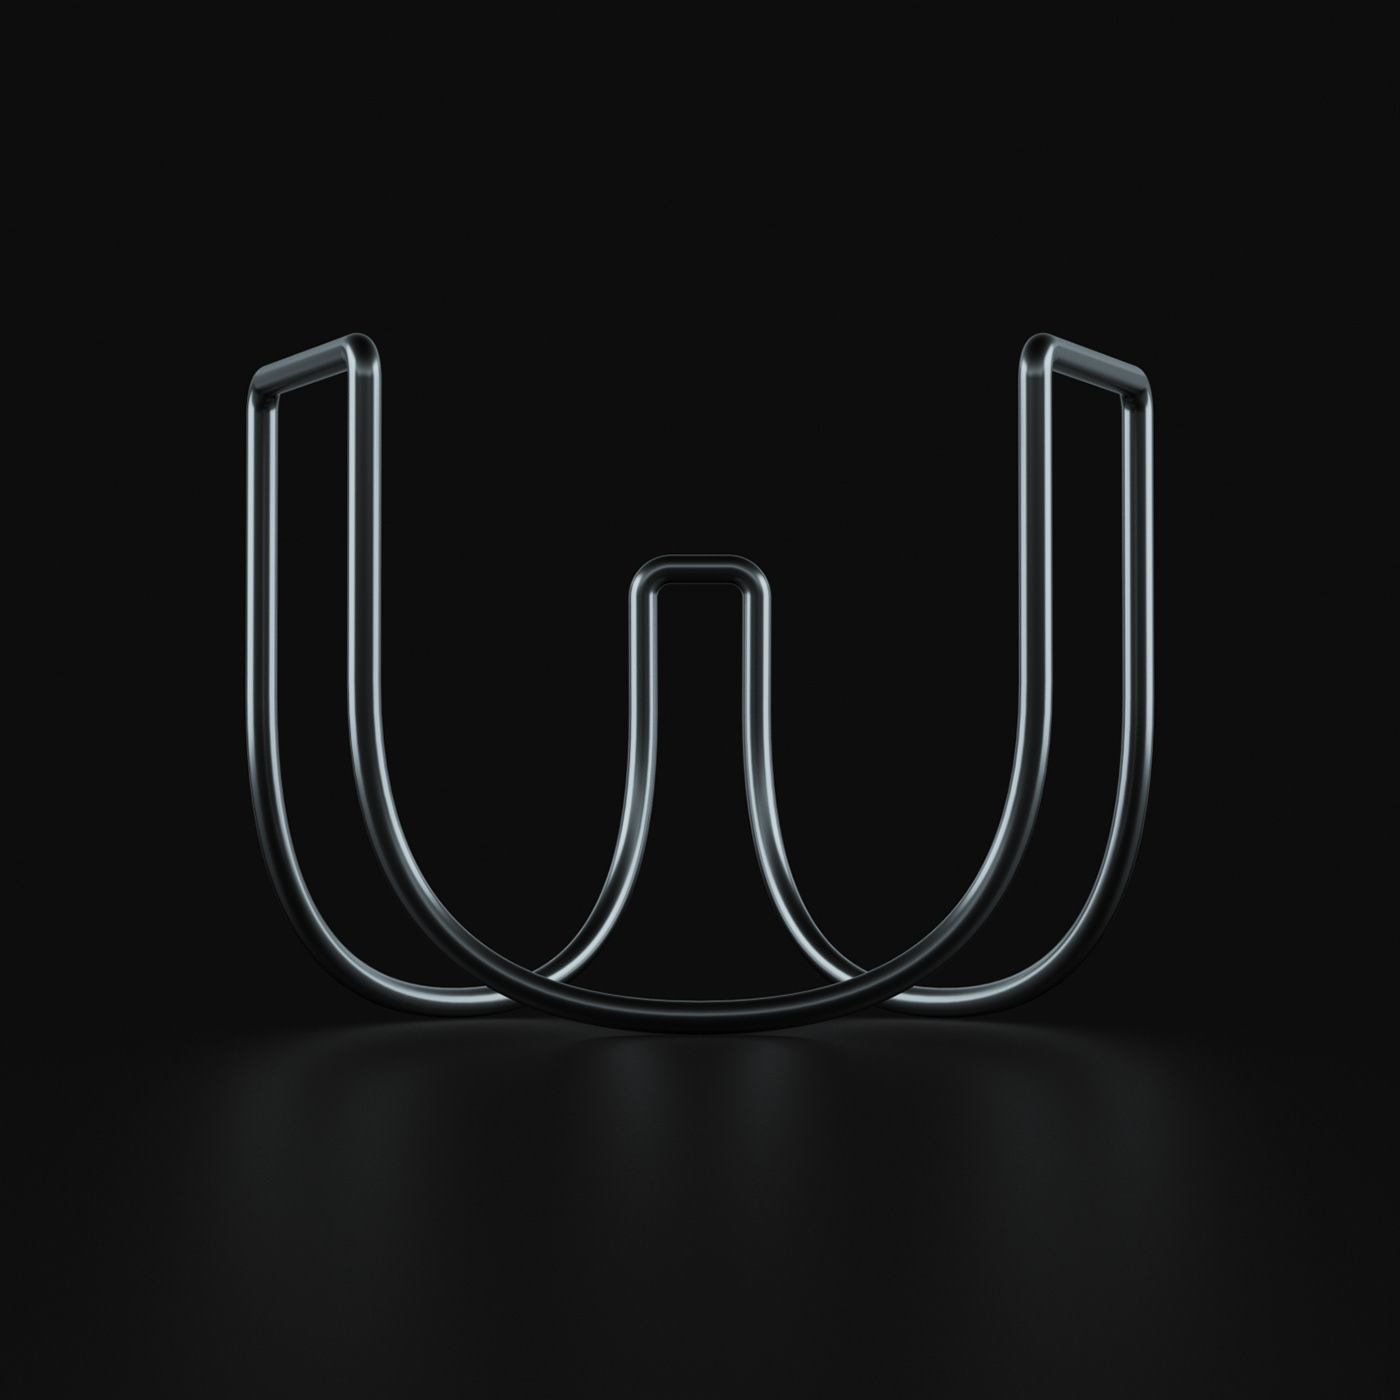 36daysoftype 3D 3Dillustration 3dletters epifantry letters lighting Minimalism numbers visualisation